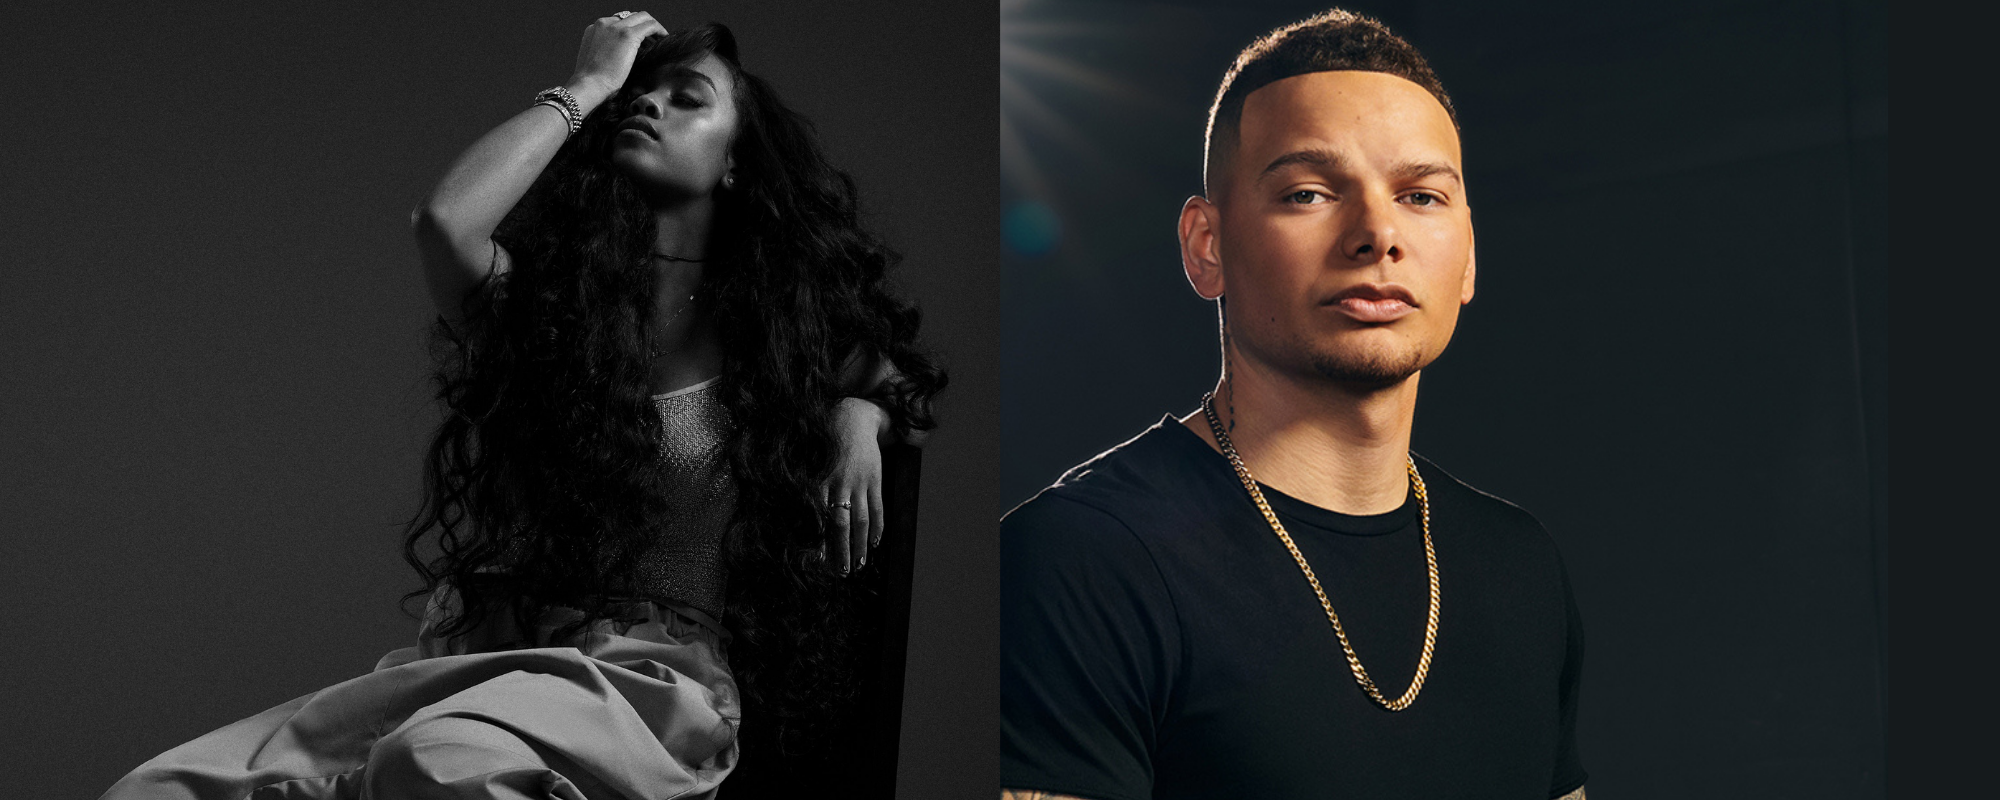 WATCH: Kane Brown & H.E.R Prove to Be a Dynamic Duo on New Genre-Bending Track “Blessed & Free”